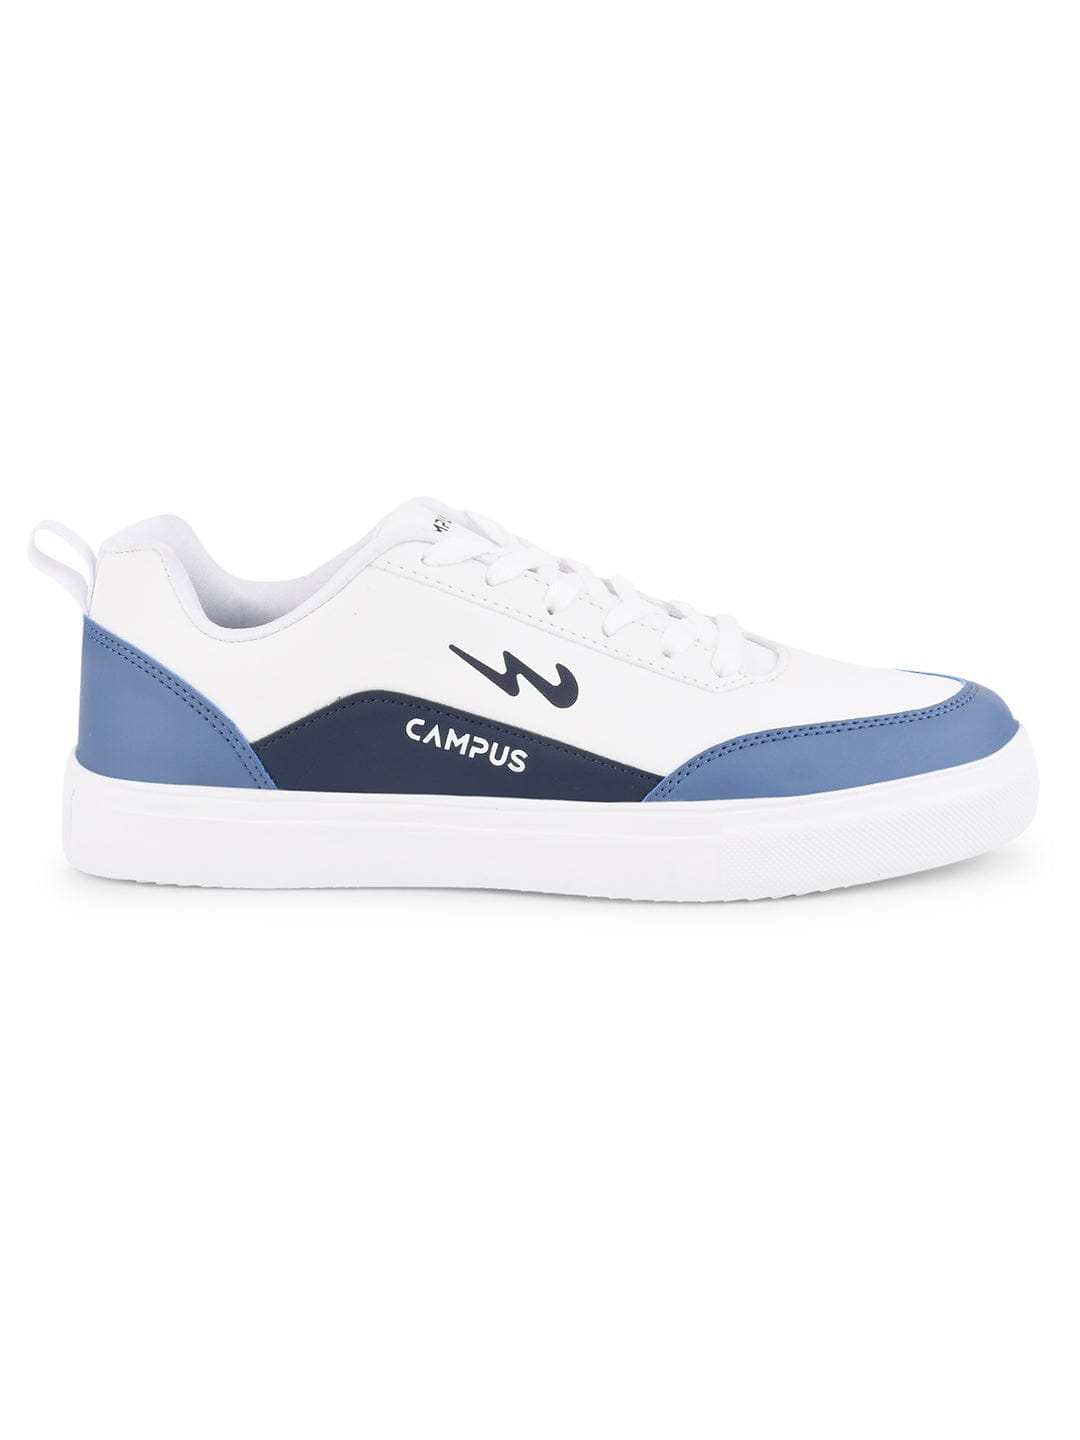 PVC Comfort Foam White Casual Shoes For Men, Sneakers at Rs 300/pair in Agra